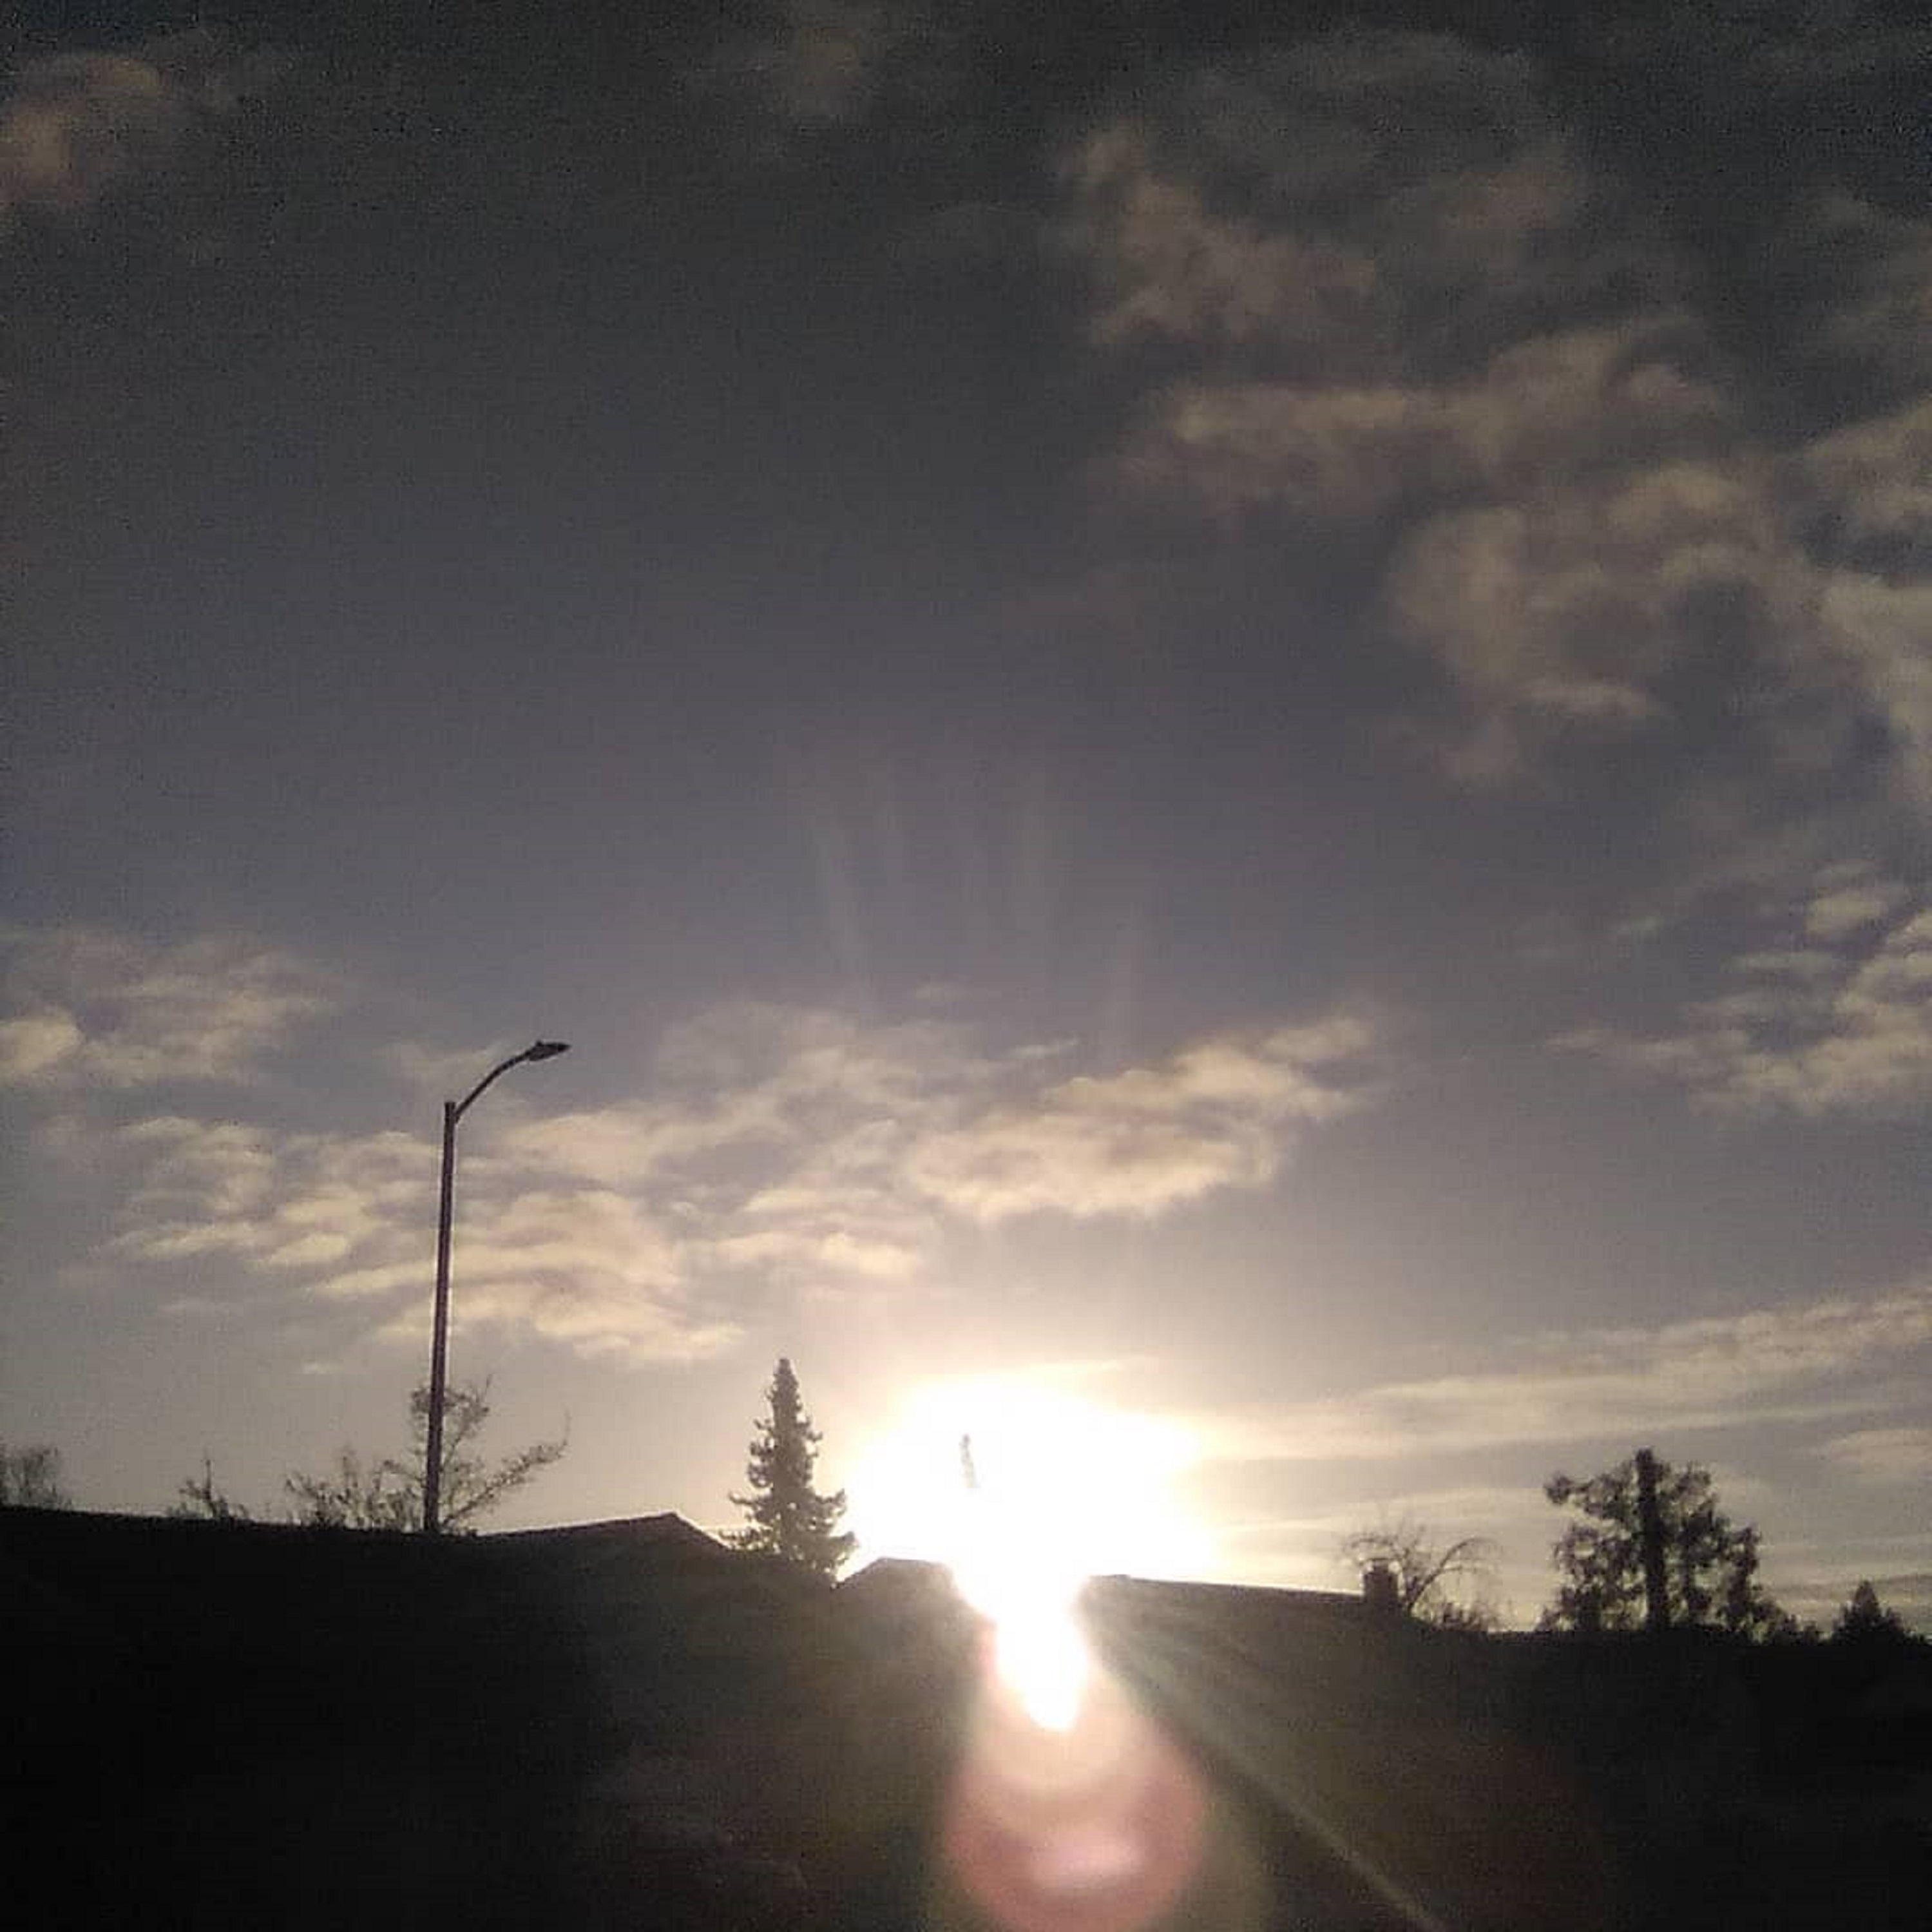 Photo taken by me on the way home from errands 12-15-20